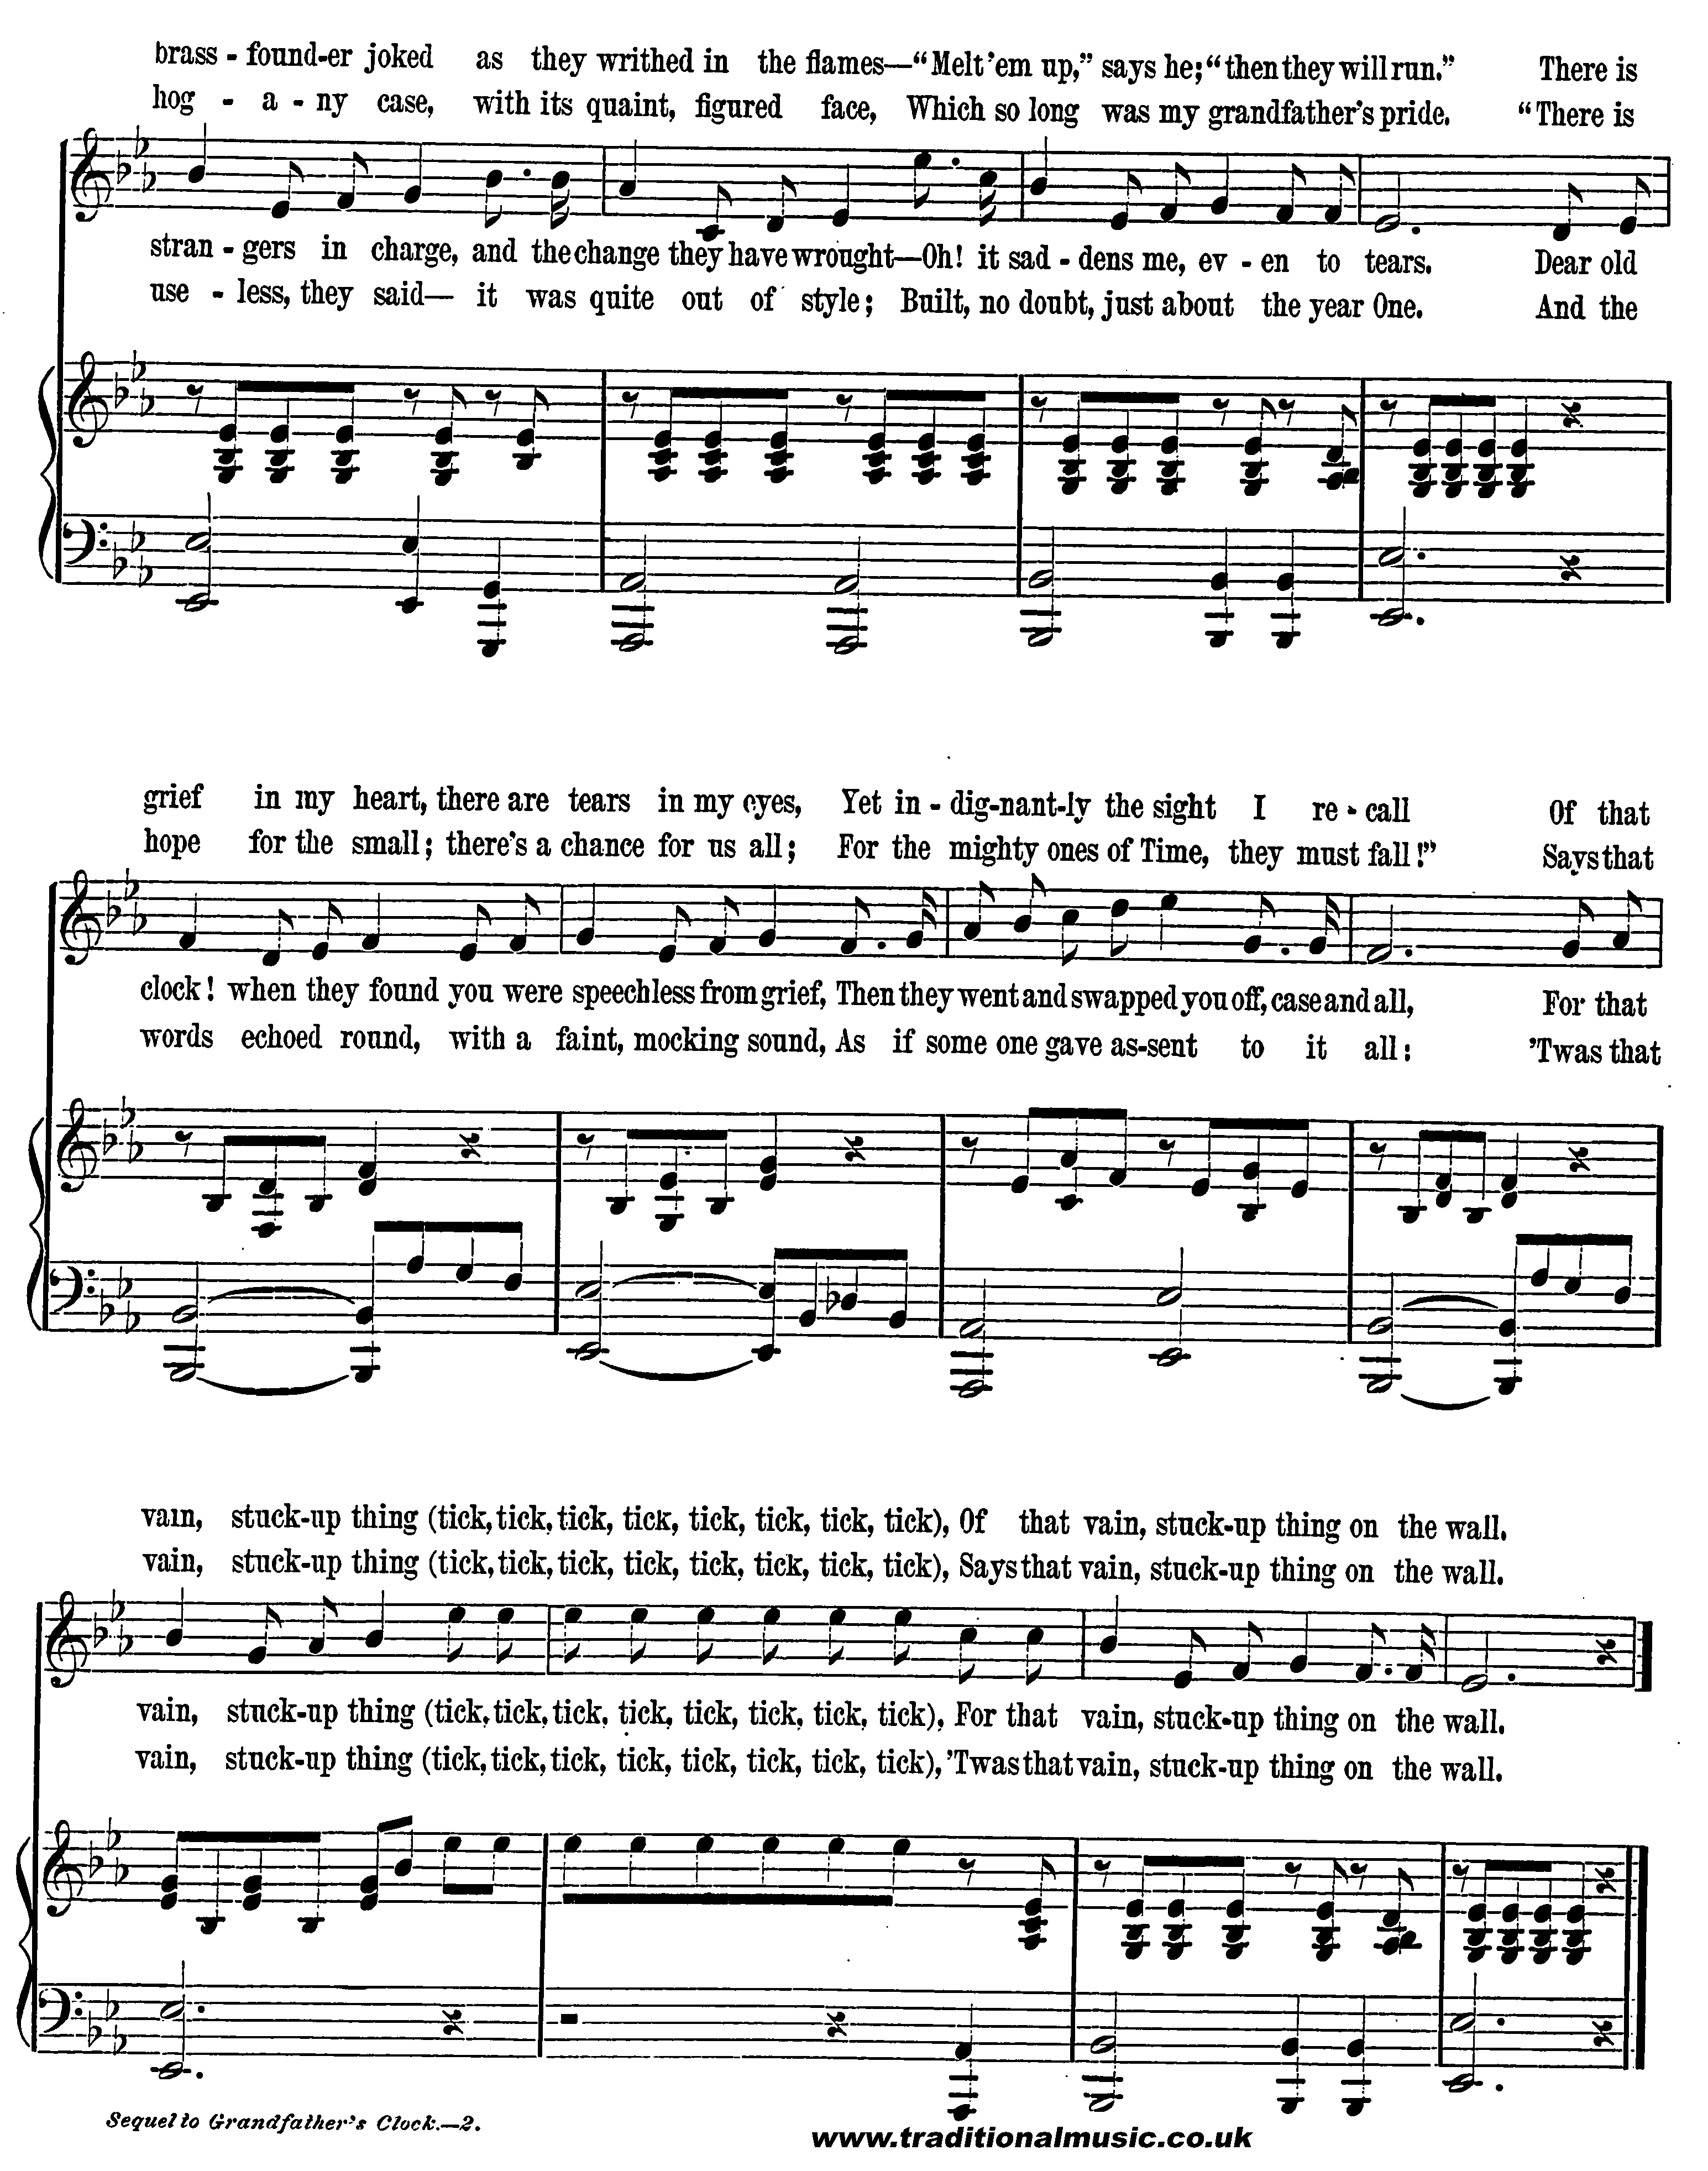 Grandfather's Clock, Sheet Music page 3